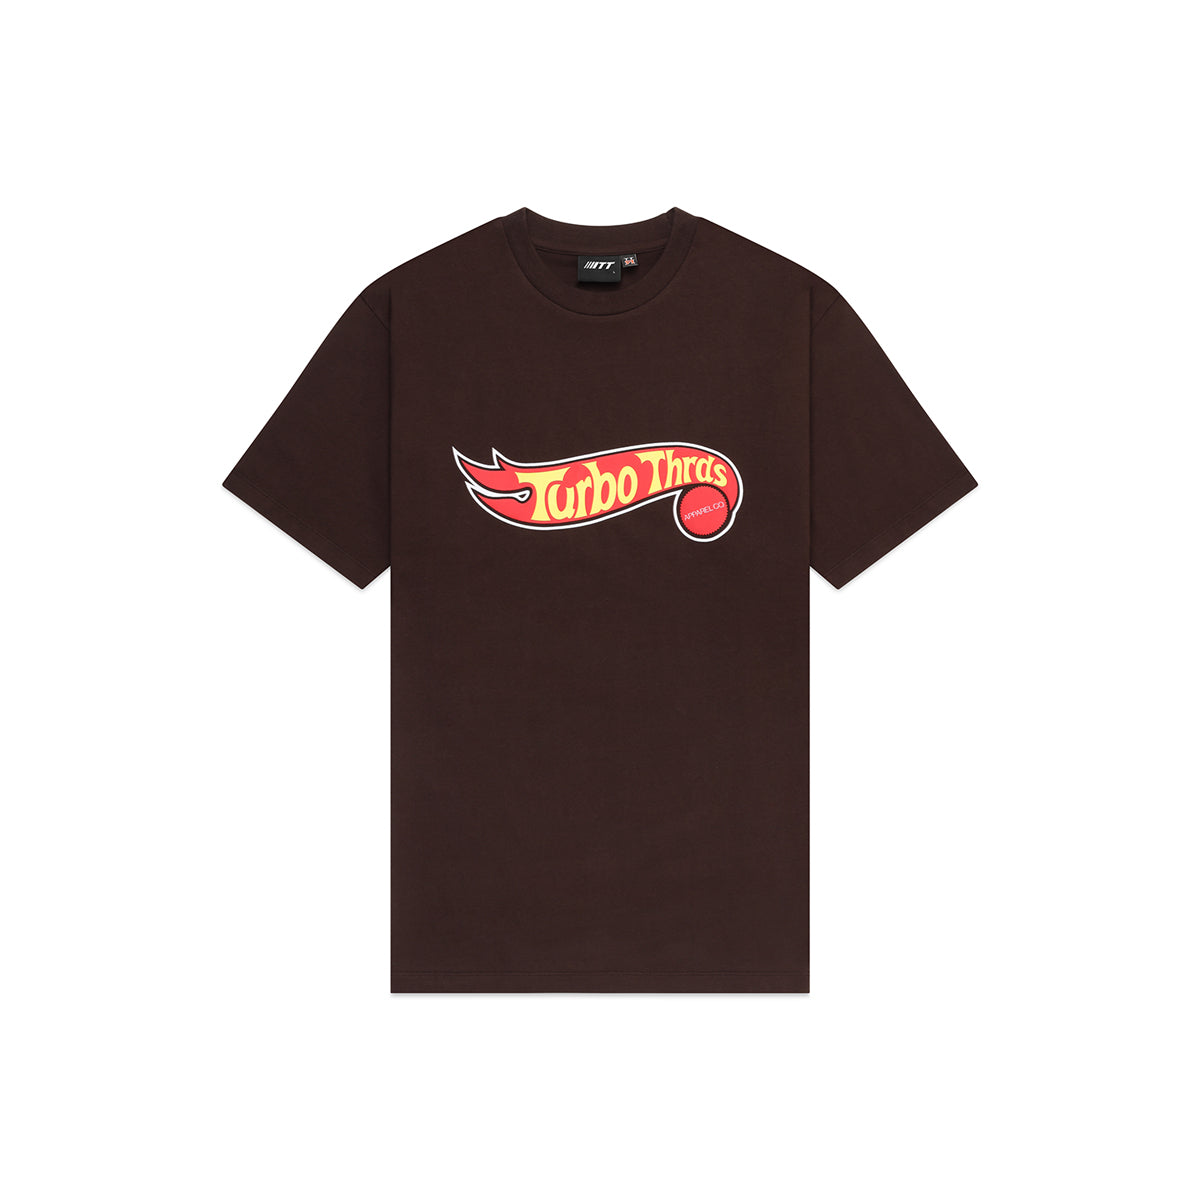 Turbo Threads Coffee Box Fit Tee with red and yellow Hot Wheels inspired logo